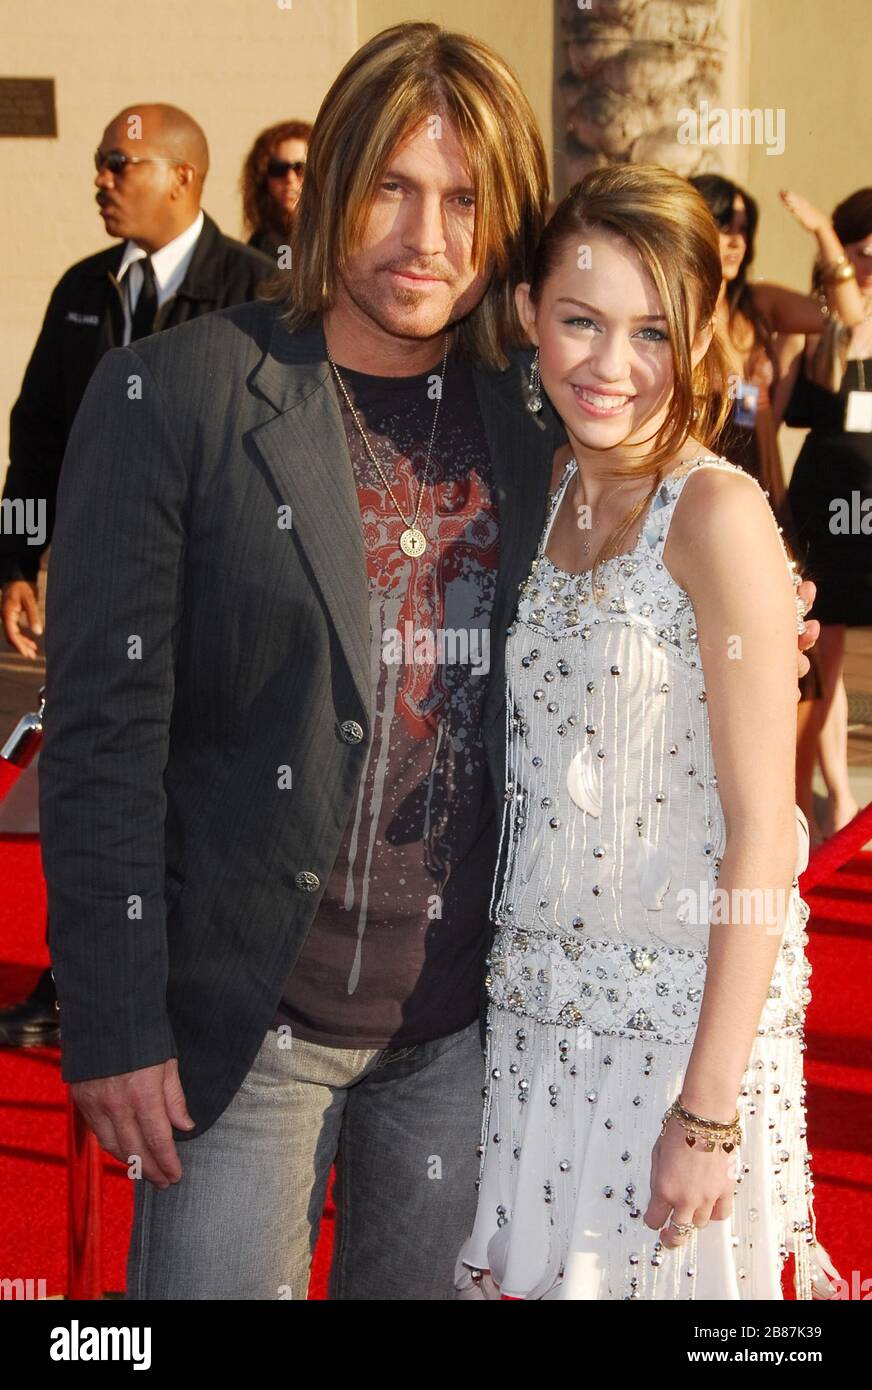 Billy Ray Cyrus and Miley Cyrus at the 34th Annual American Music Awards held at the Shrine Auditorium in Los Angeles, CA. The event took place on Tuesday, November 21, 2006.  Photo by: SBM / PictureLux - File Reference # 33984-9531SBMPLX Stock Photo